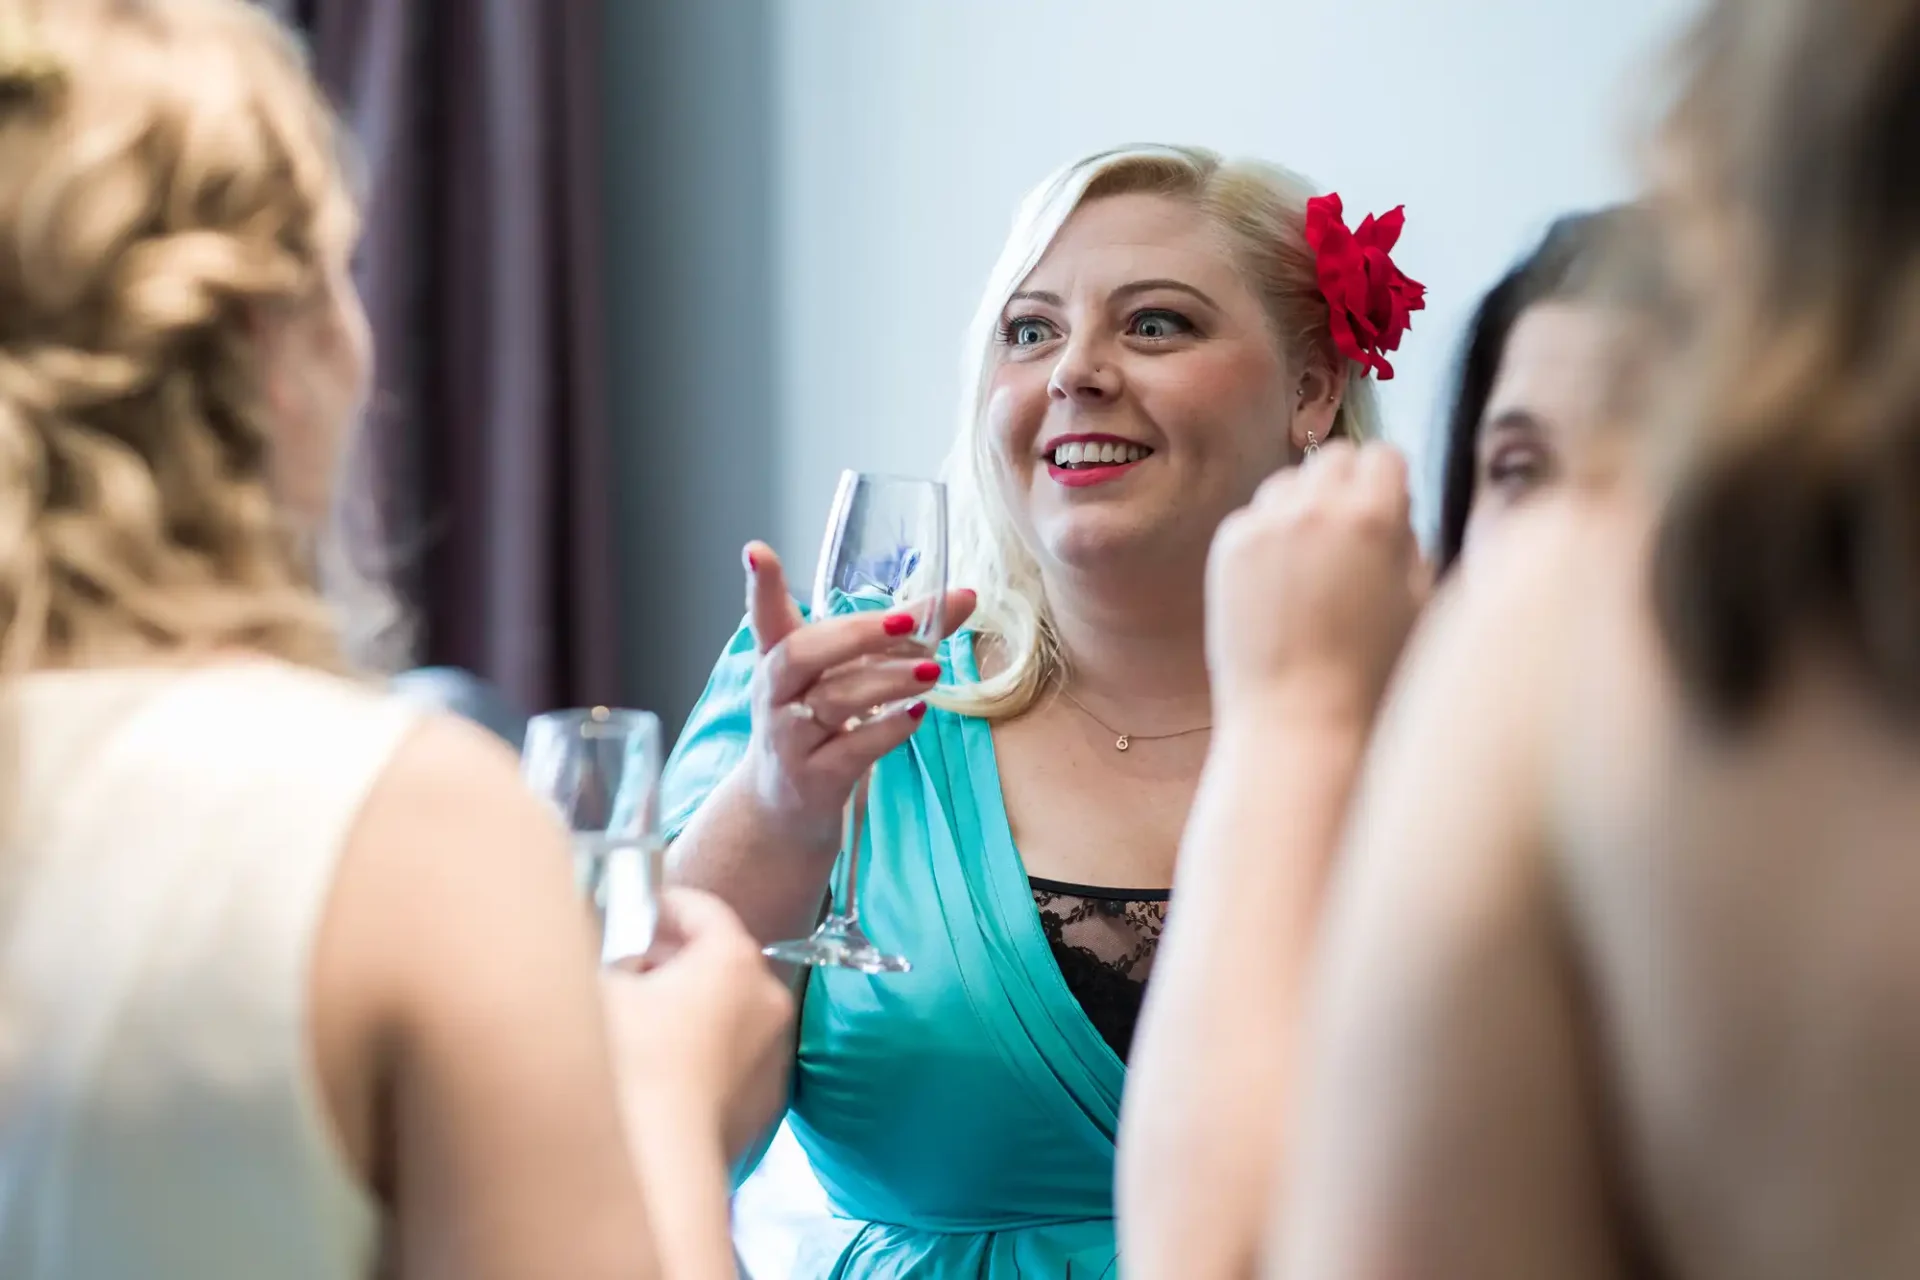 A woman in a teal dress with a red flower in her hair smiling and holding a glass of wine at a social gathering.